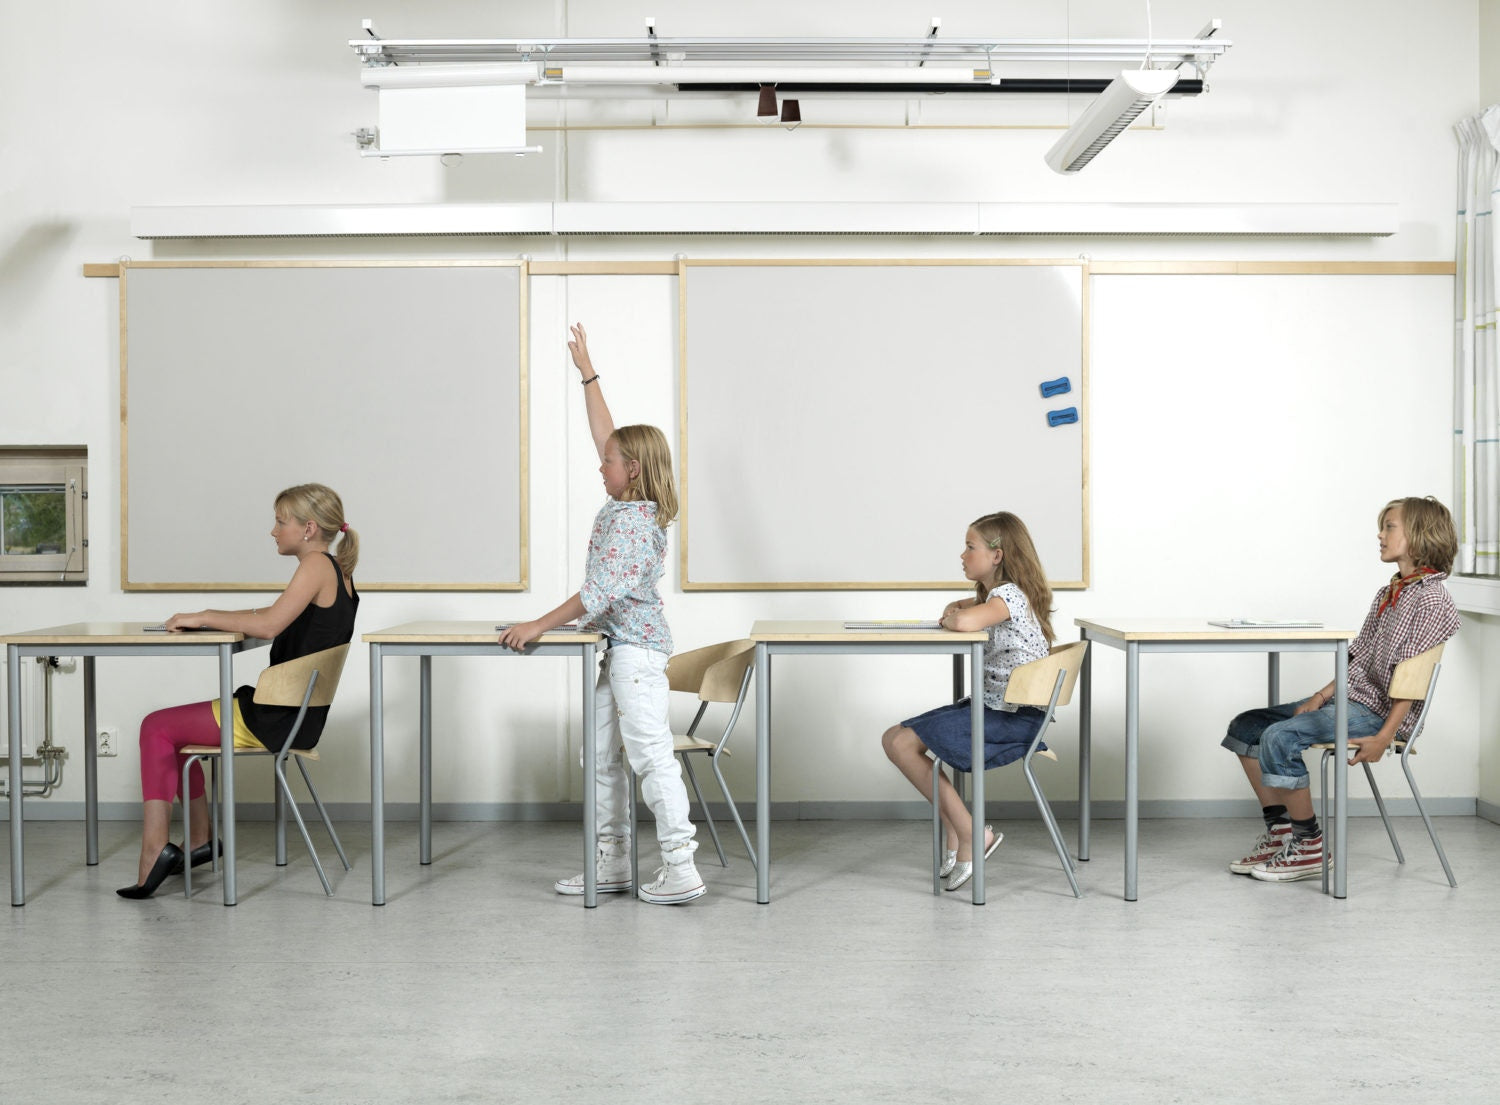 A student raising hand among other students in a class